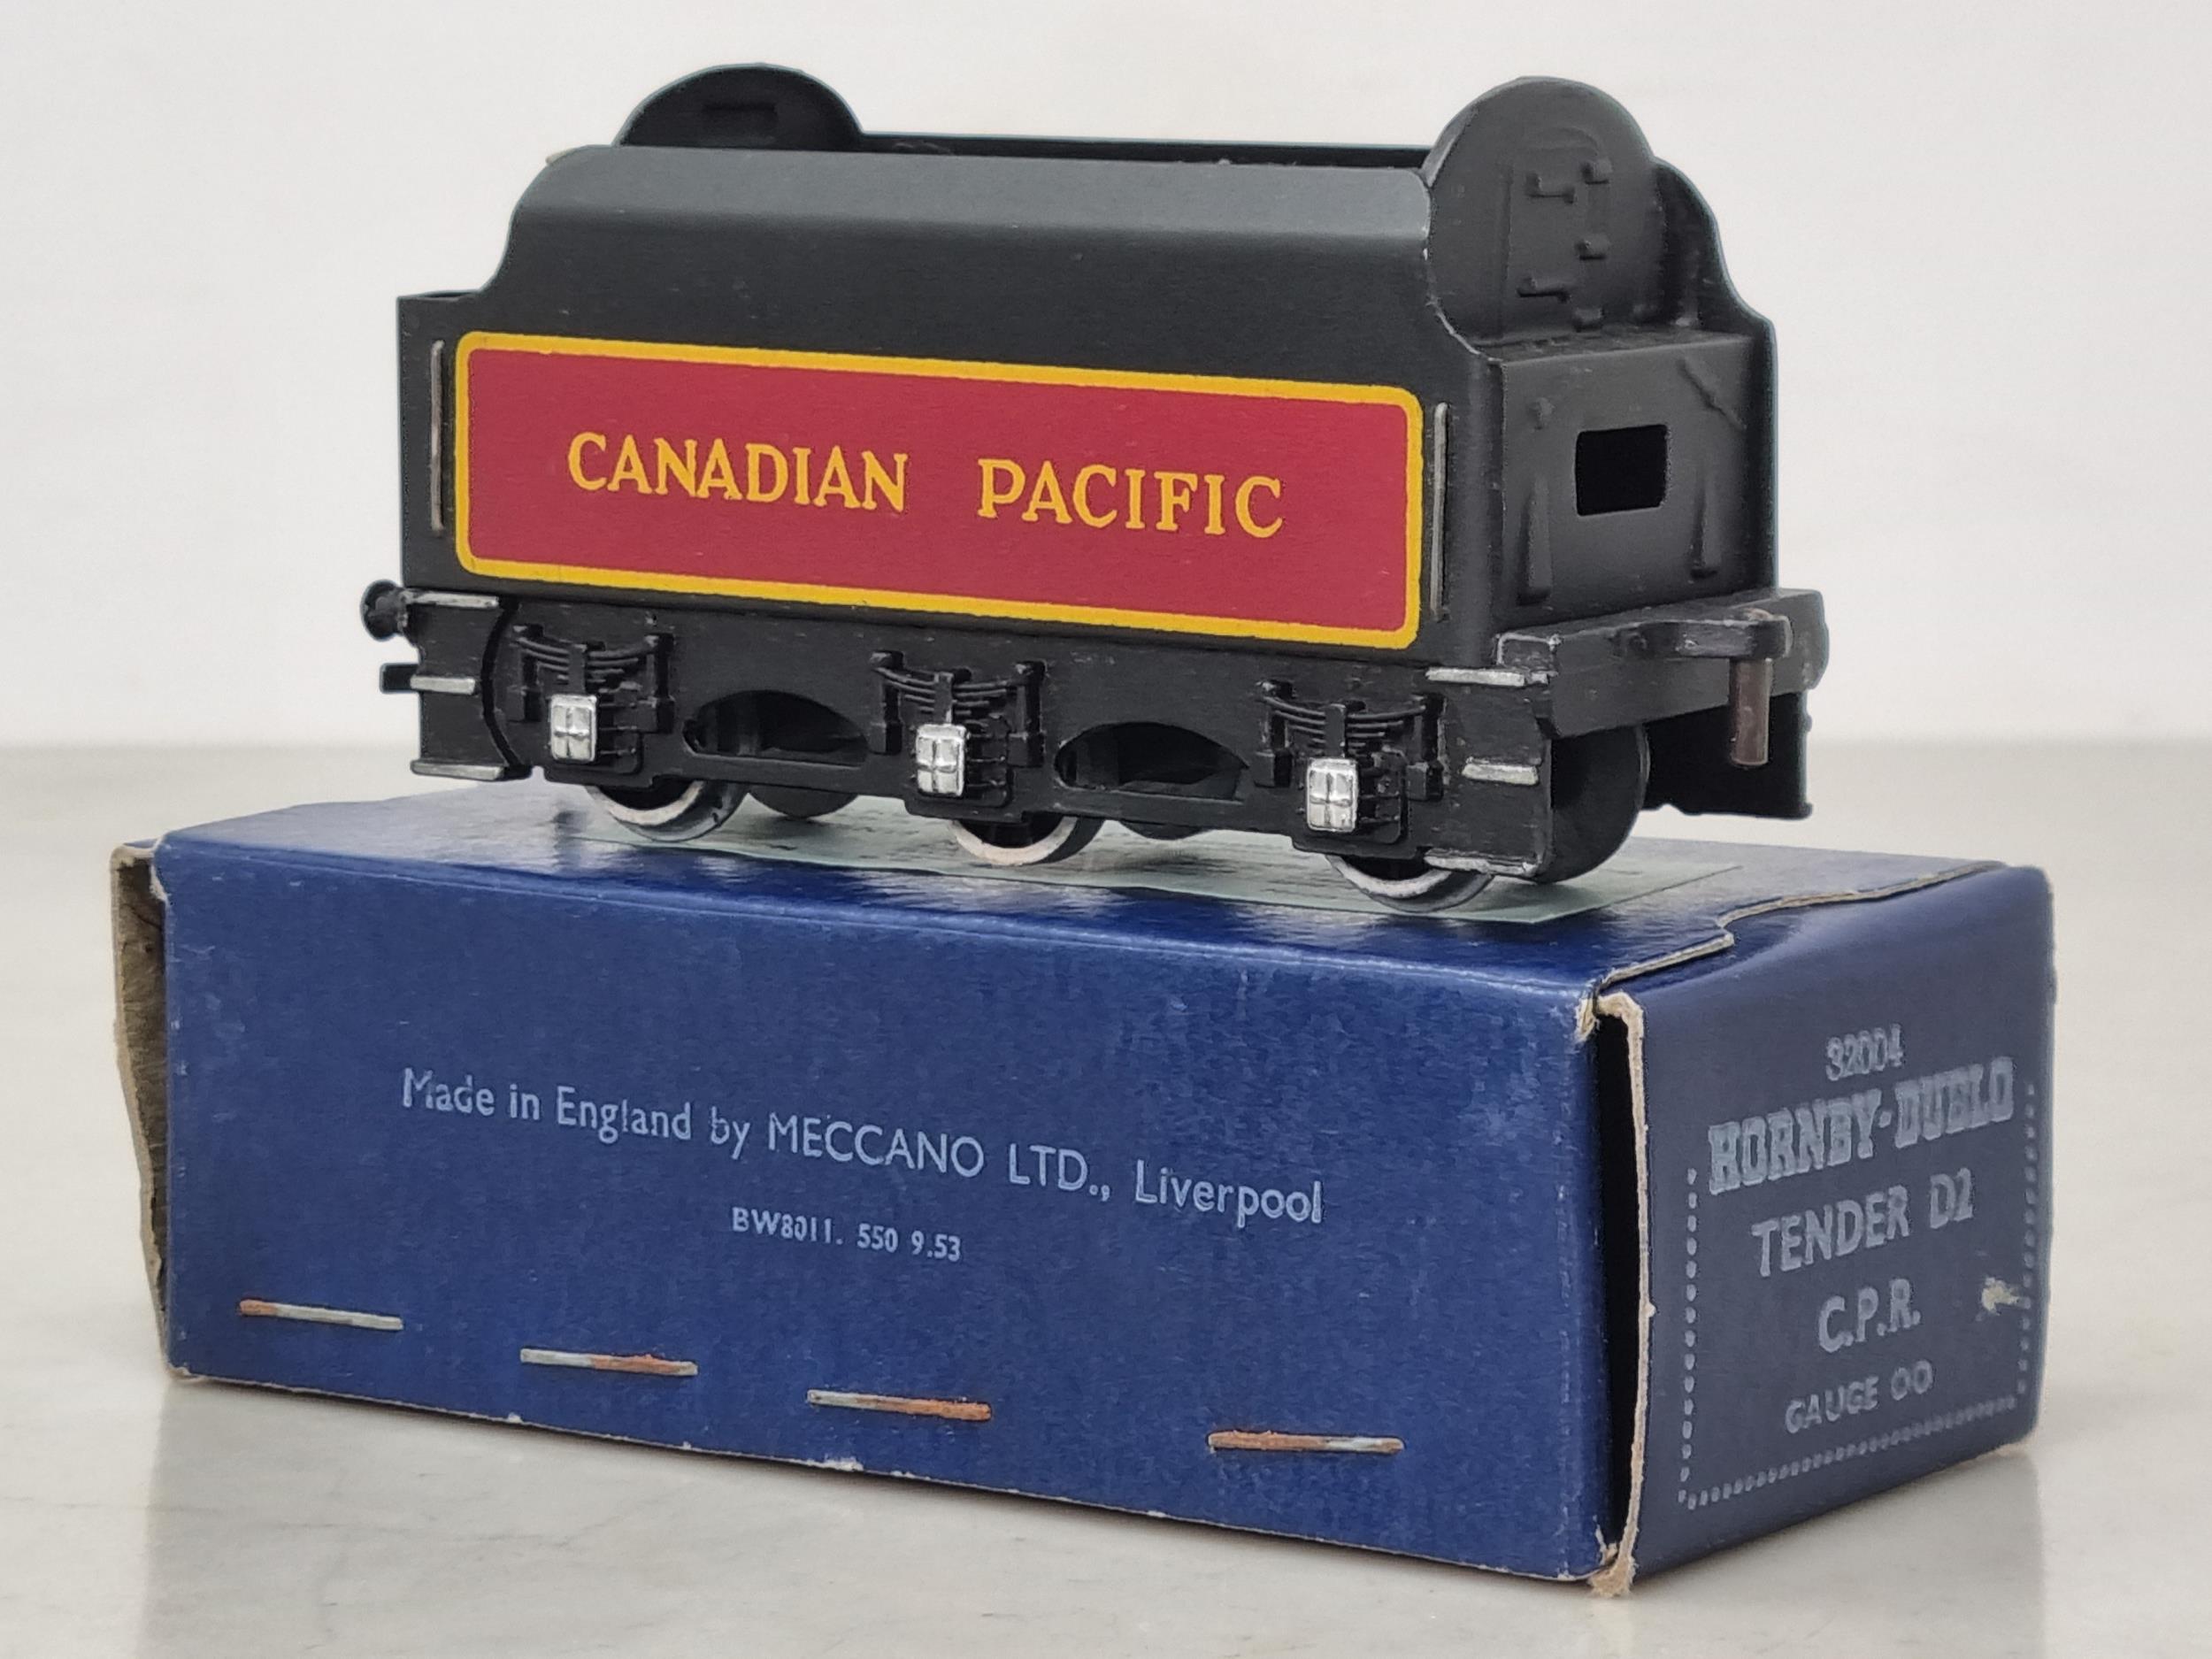 A rare boxed Hornby Dublo D2 C.P.R. Tender, almost certainly unused and in mint condition. Box in